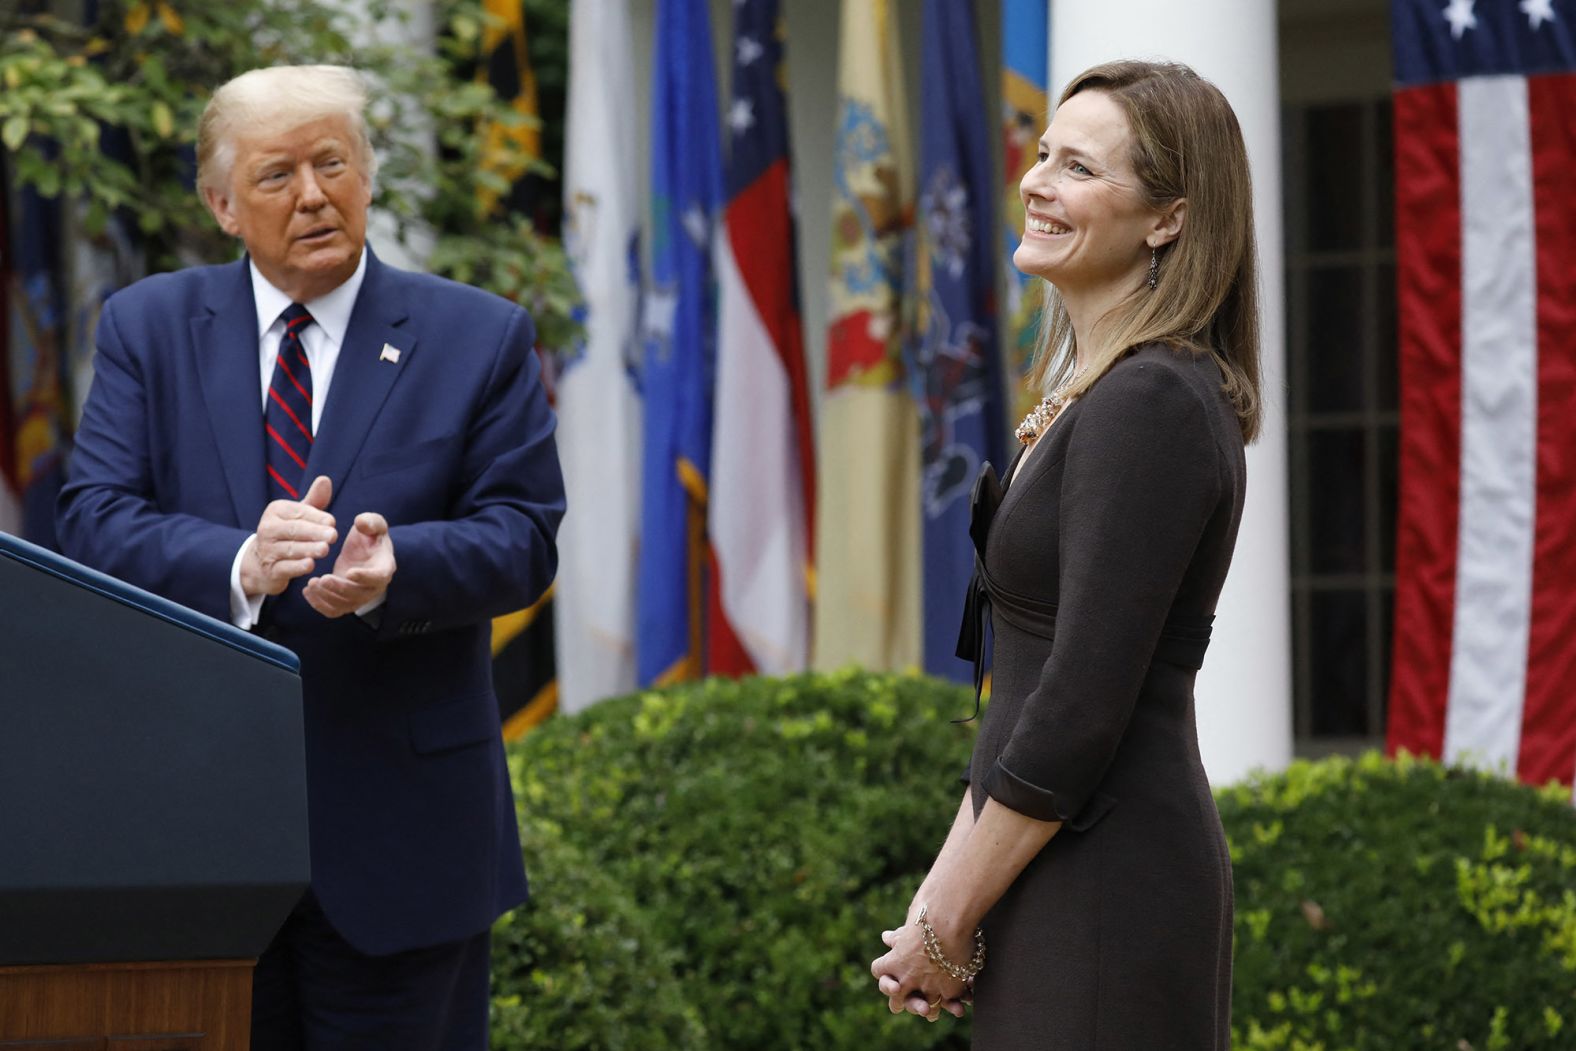 Judge Amy Coney Barrett reacts as Trump <a href="index.php?page=&url=https%3A%2F%2Fwww.cnn.com%2F2020%2F09%2F26%2Fpolitics%2Famy-coney-barrett-supreme-court-nominee%2Findex.html" target="_blank">introduces her as his Supreme Court nominee</a> in September 2020. <a href="index.php?page=&url=http%3A%2F%2Fwww.cnn.com%2F2020%2F10%2F09%2Fpolitics%2Fgallery%2Famy-coney-barrett%2Findex.html" target="_blank">She was confirmed</a> a month later by a Senate vote of 52-48.